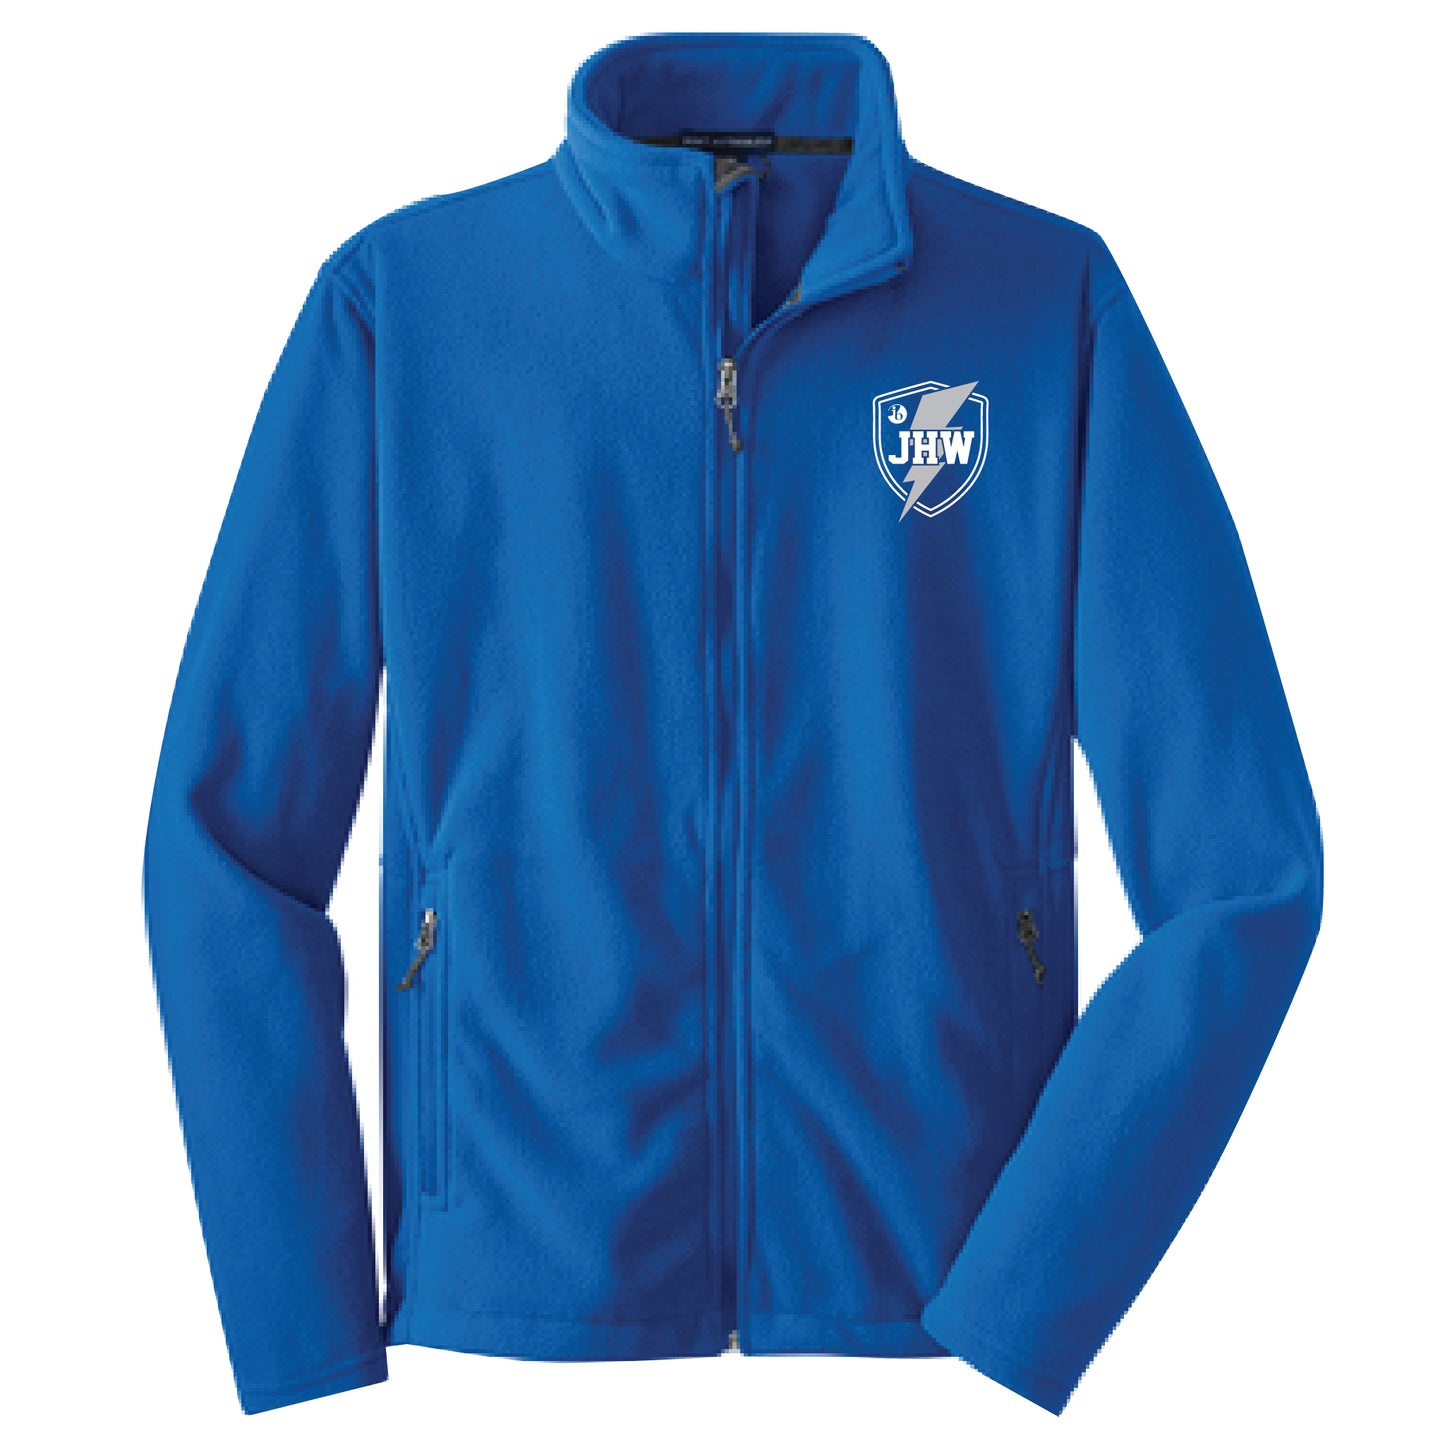 JHW Royal Blue Fleece Jacket, Youth and Adult Sizes – Original Ink